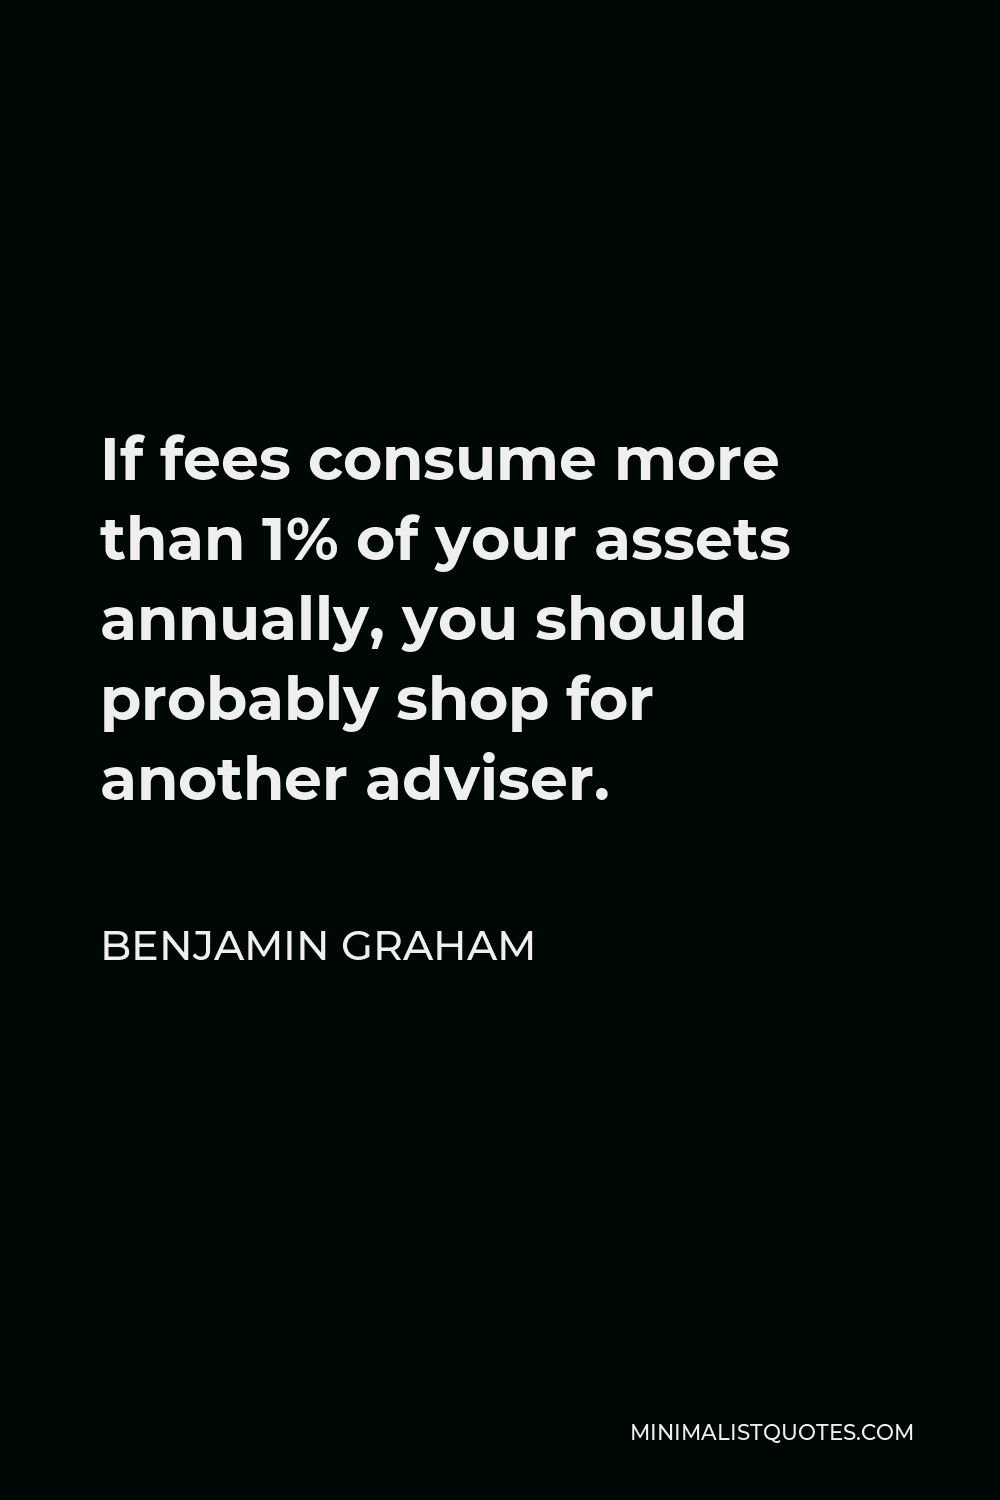 Benjamin Graham Quote - If fees consume more than 1% of your assets annually, you should probably shop for another adviser.